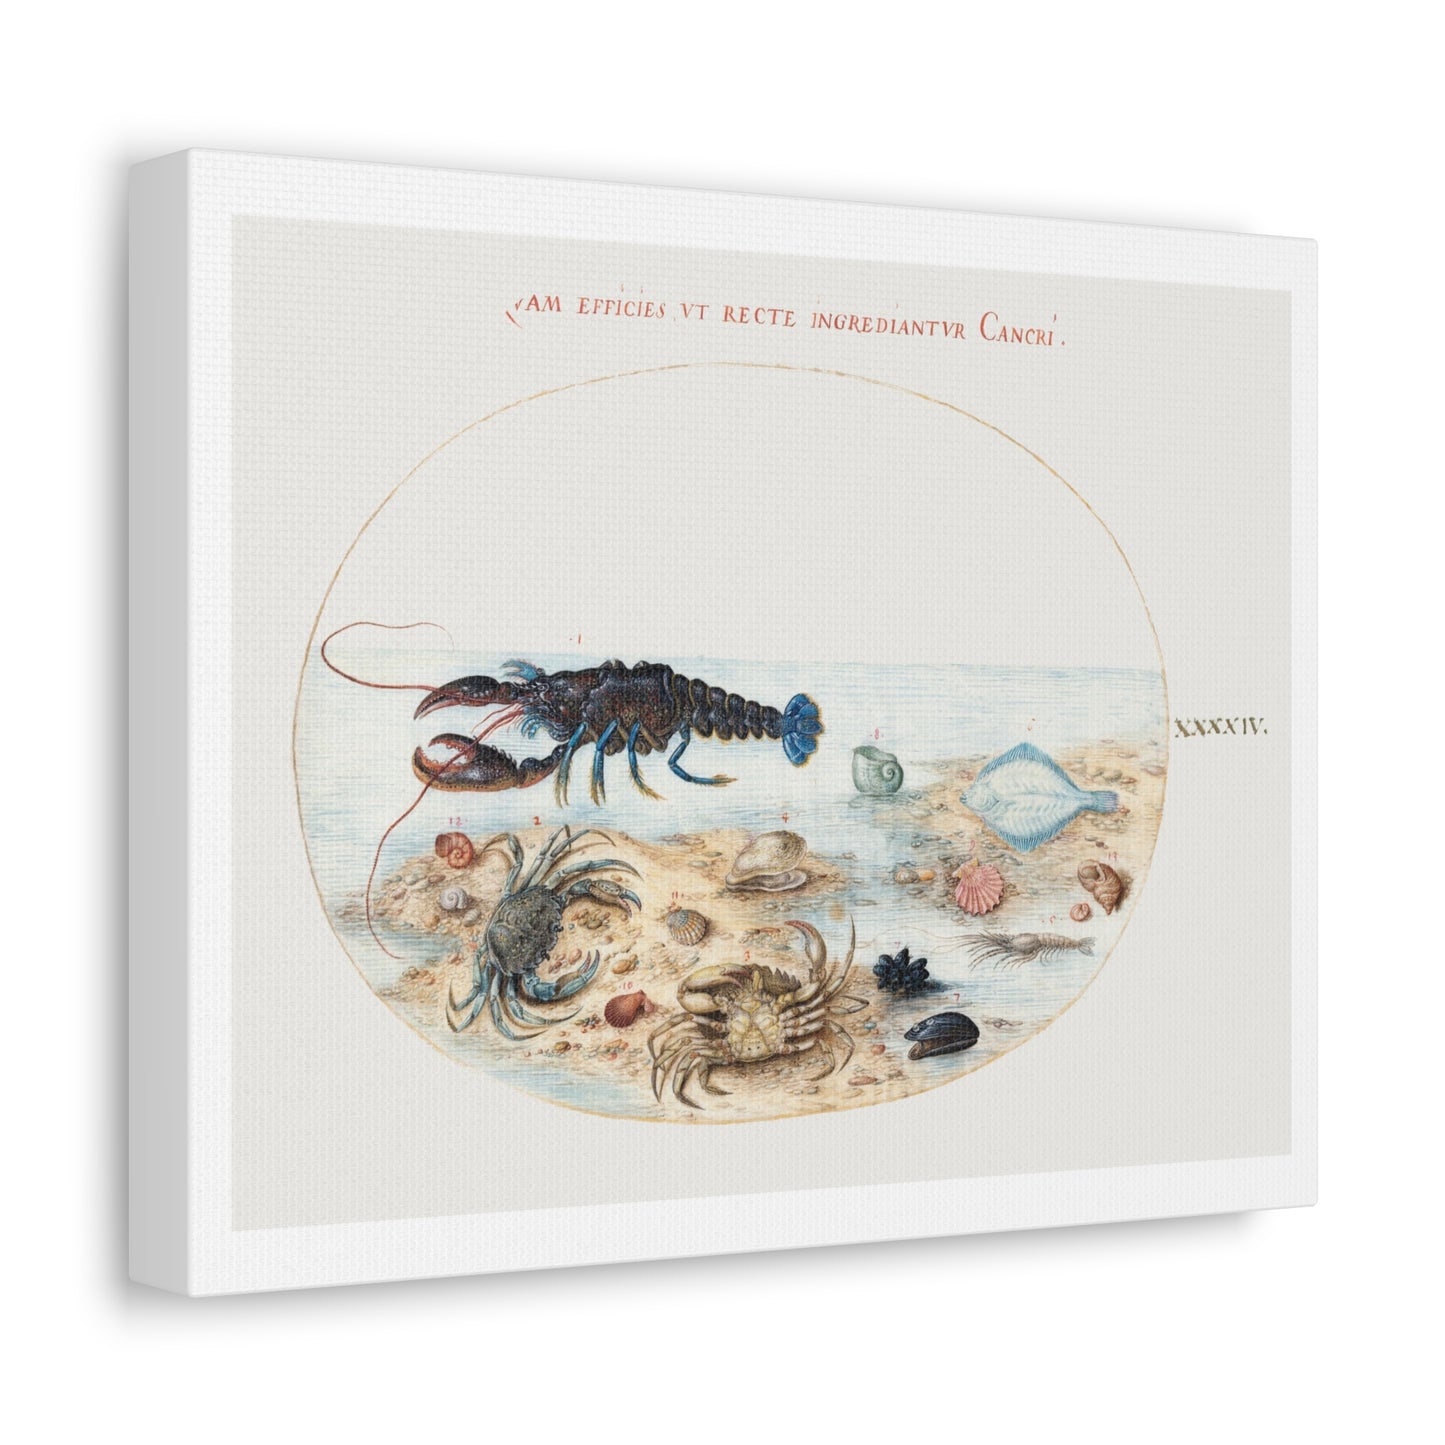 Lobster, Crabs, Scallop Shells and Other Sea Life (1575–1580) by Joris Hoefnagel, from the Original, Print on Canvas